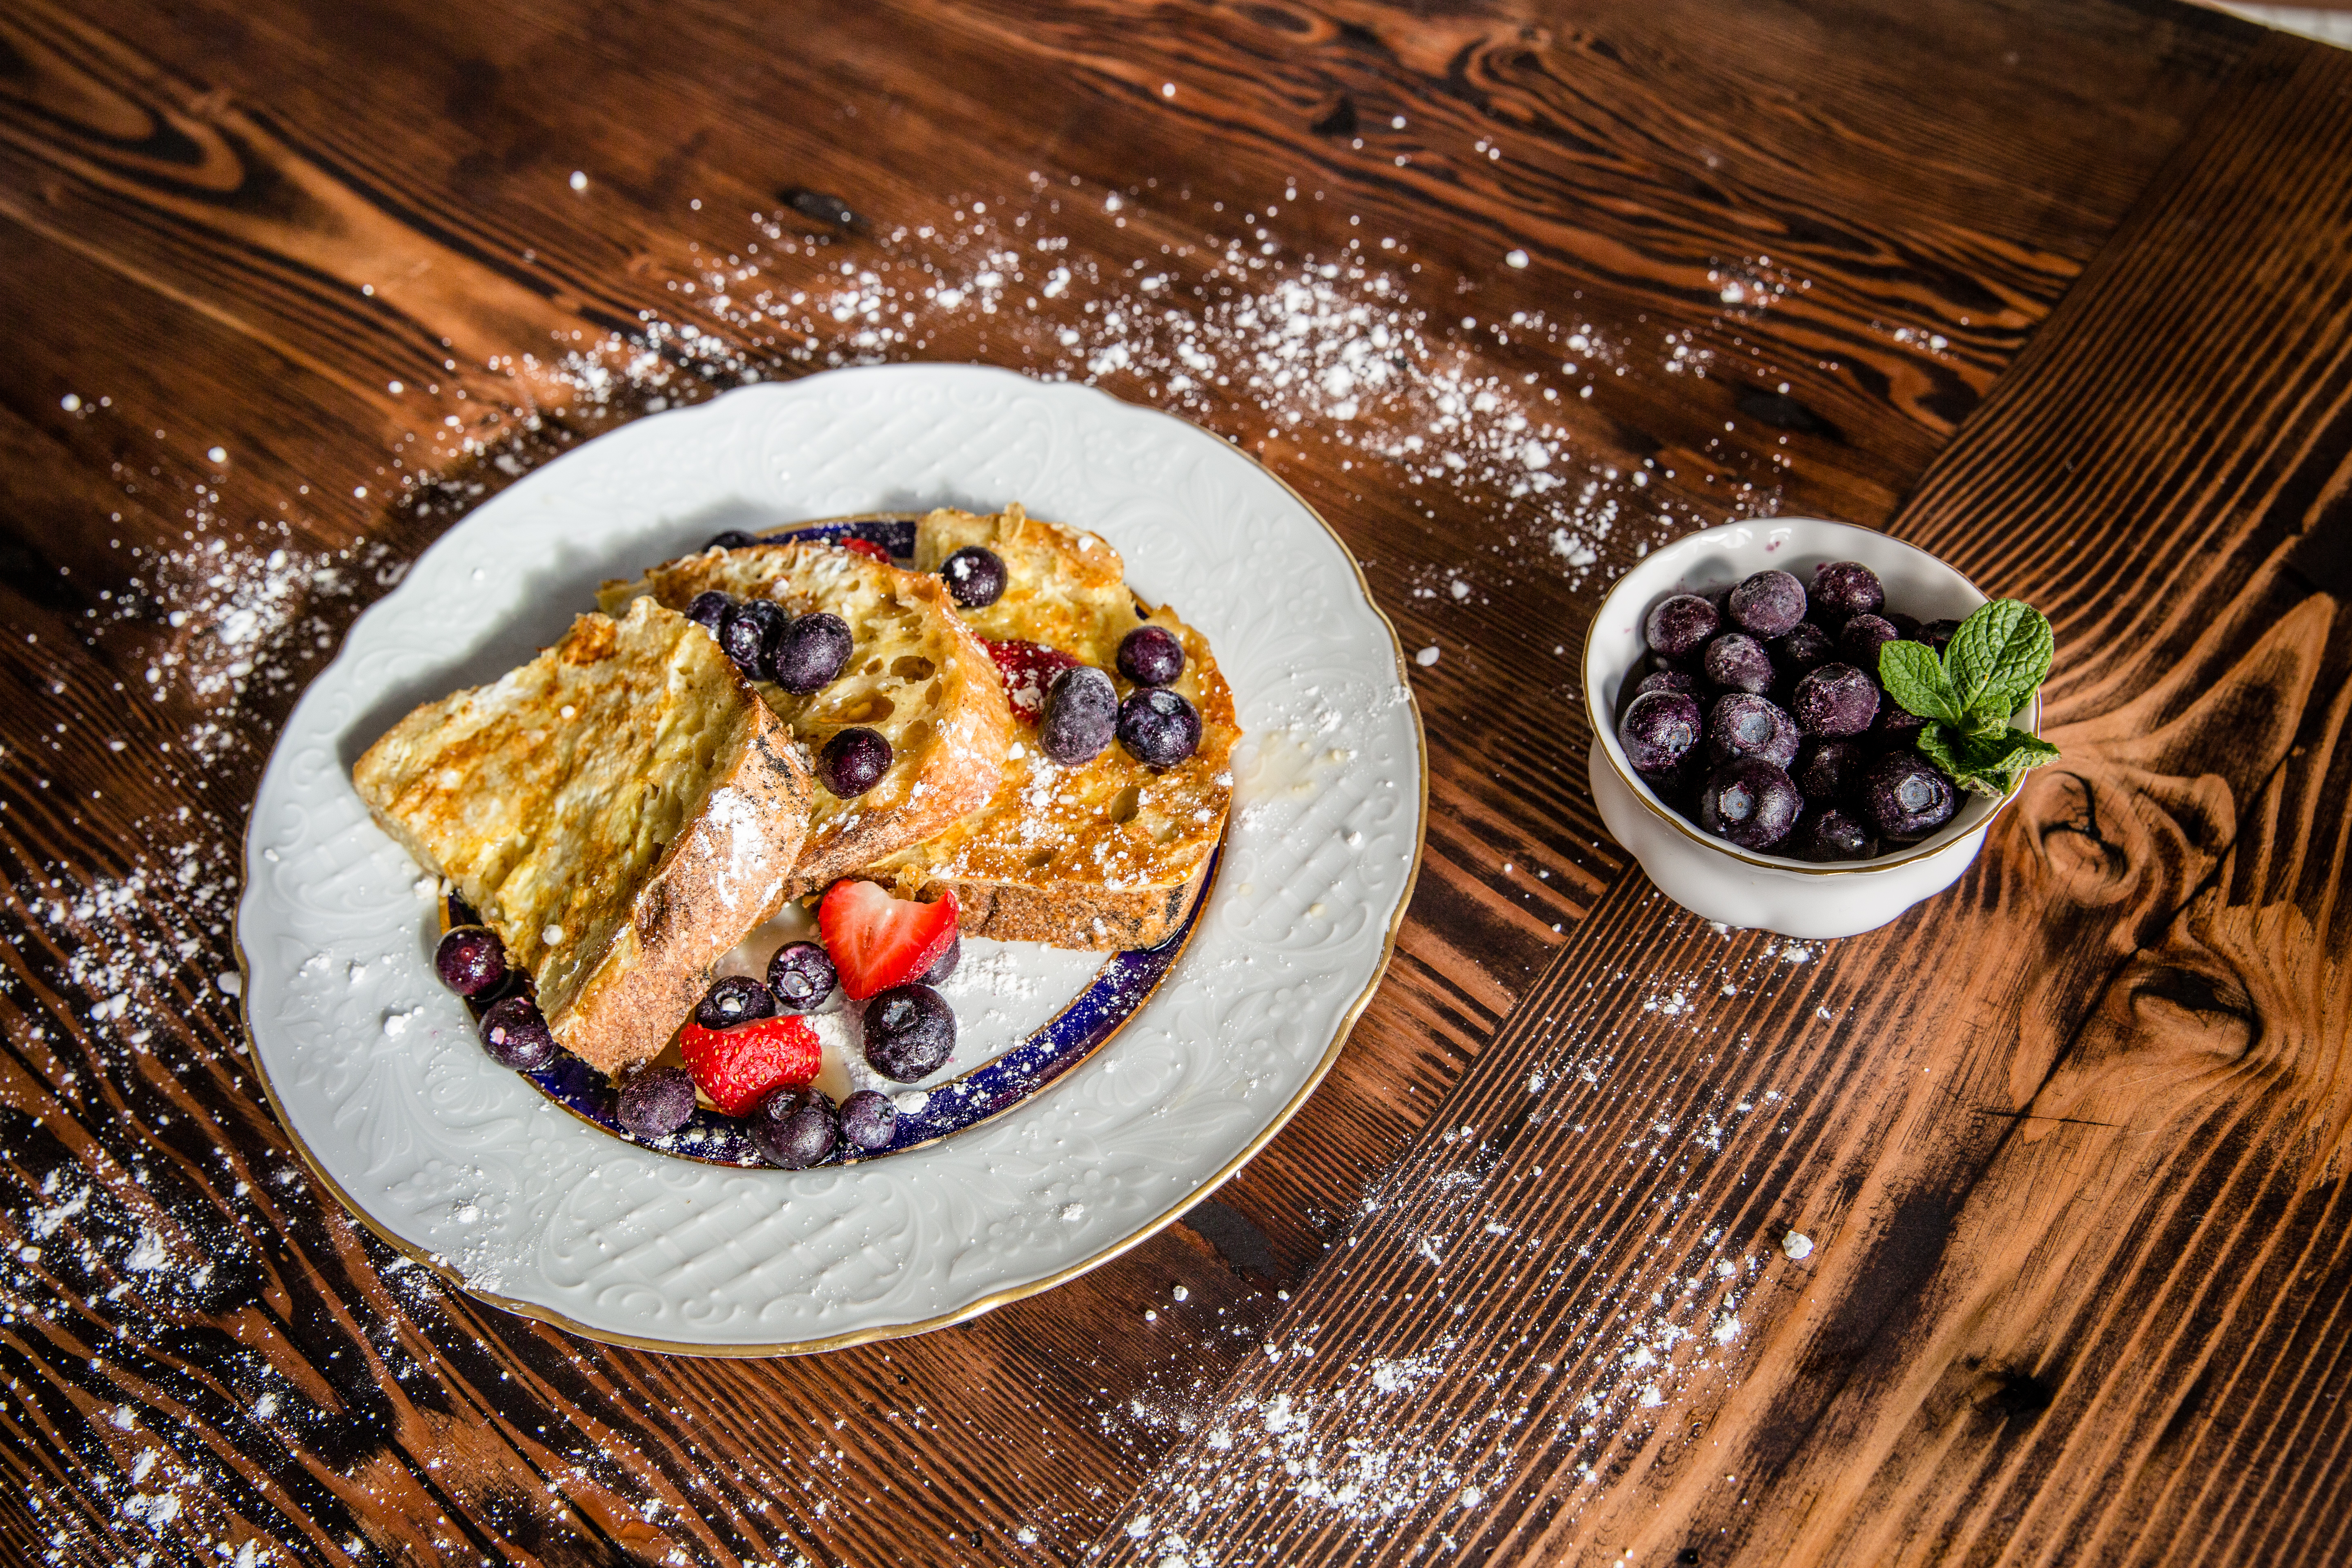 Frozen BC Blueberries and French toast. Photo credit: Rhonda Dent Photography